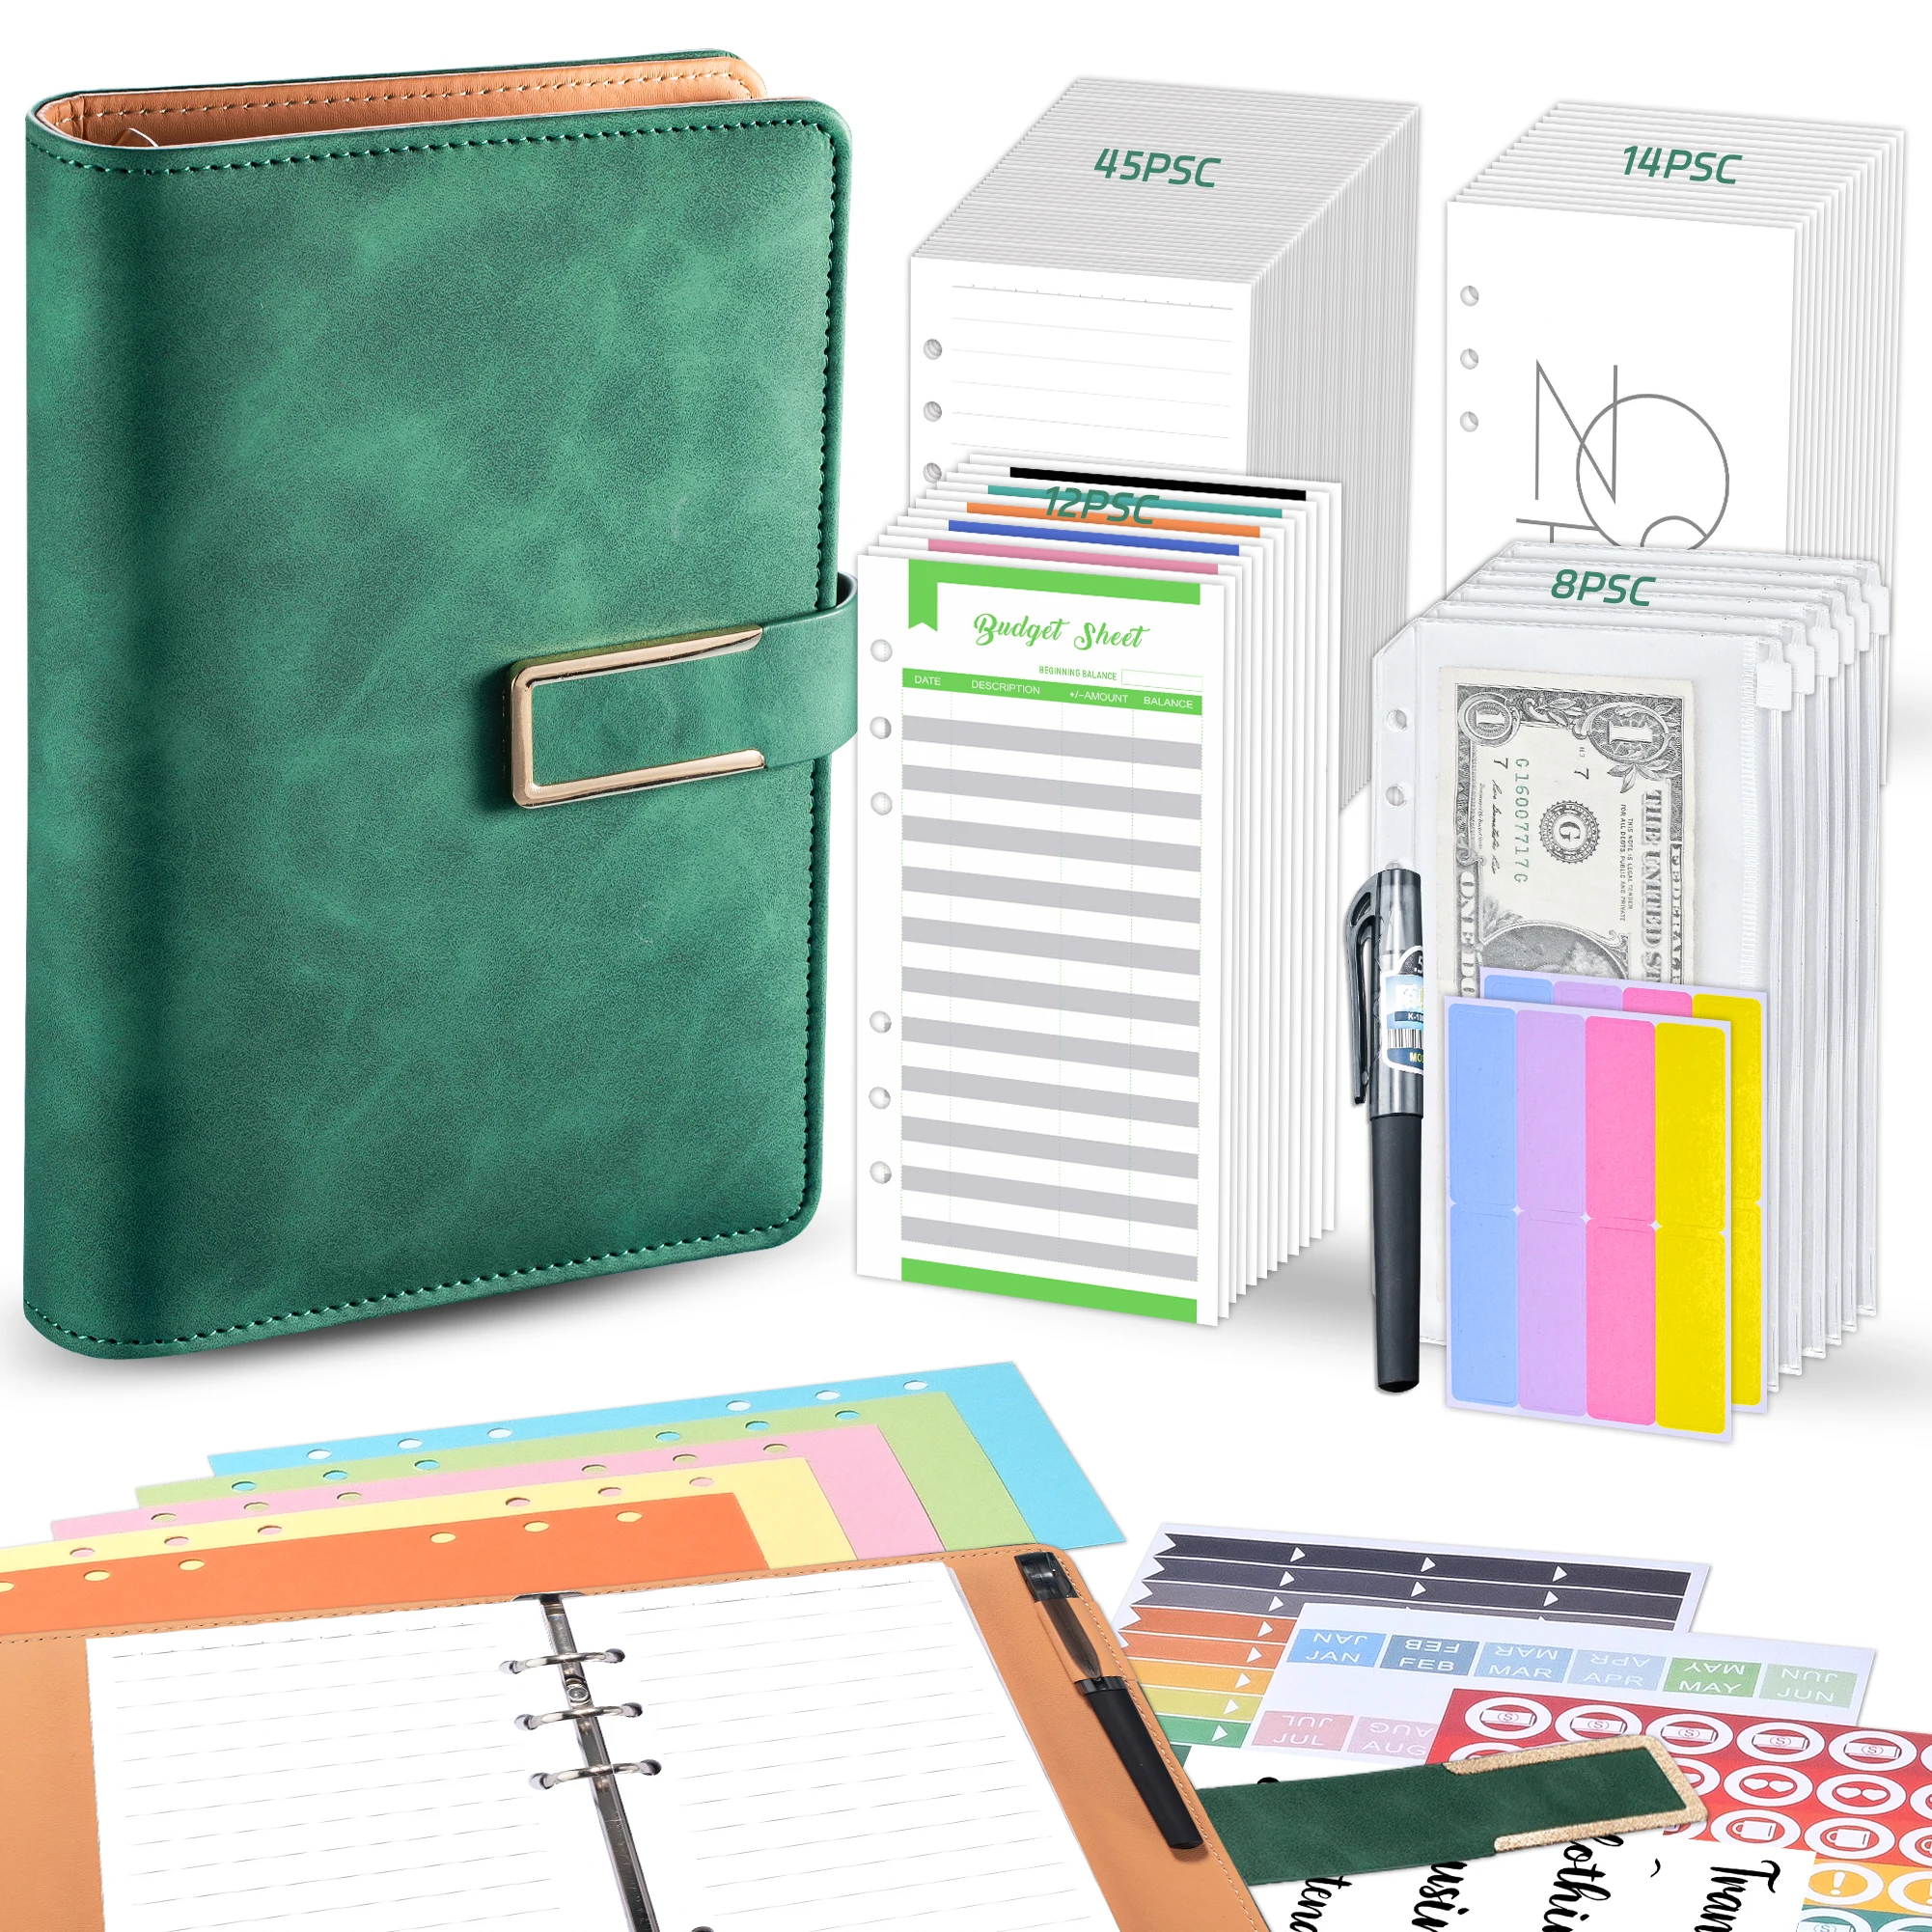 

A6 PU leather custom journal notebook Planner Budget Binder with cash envelopes everthing included rings binder with buckle